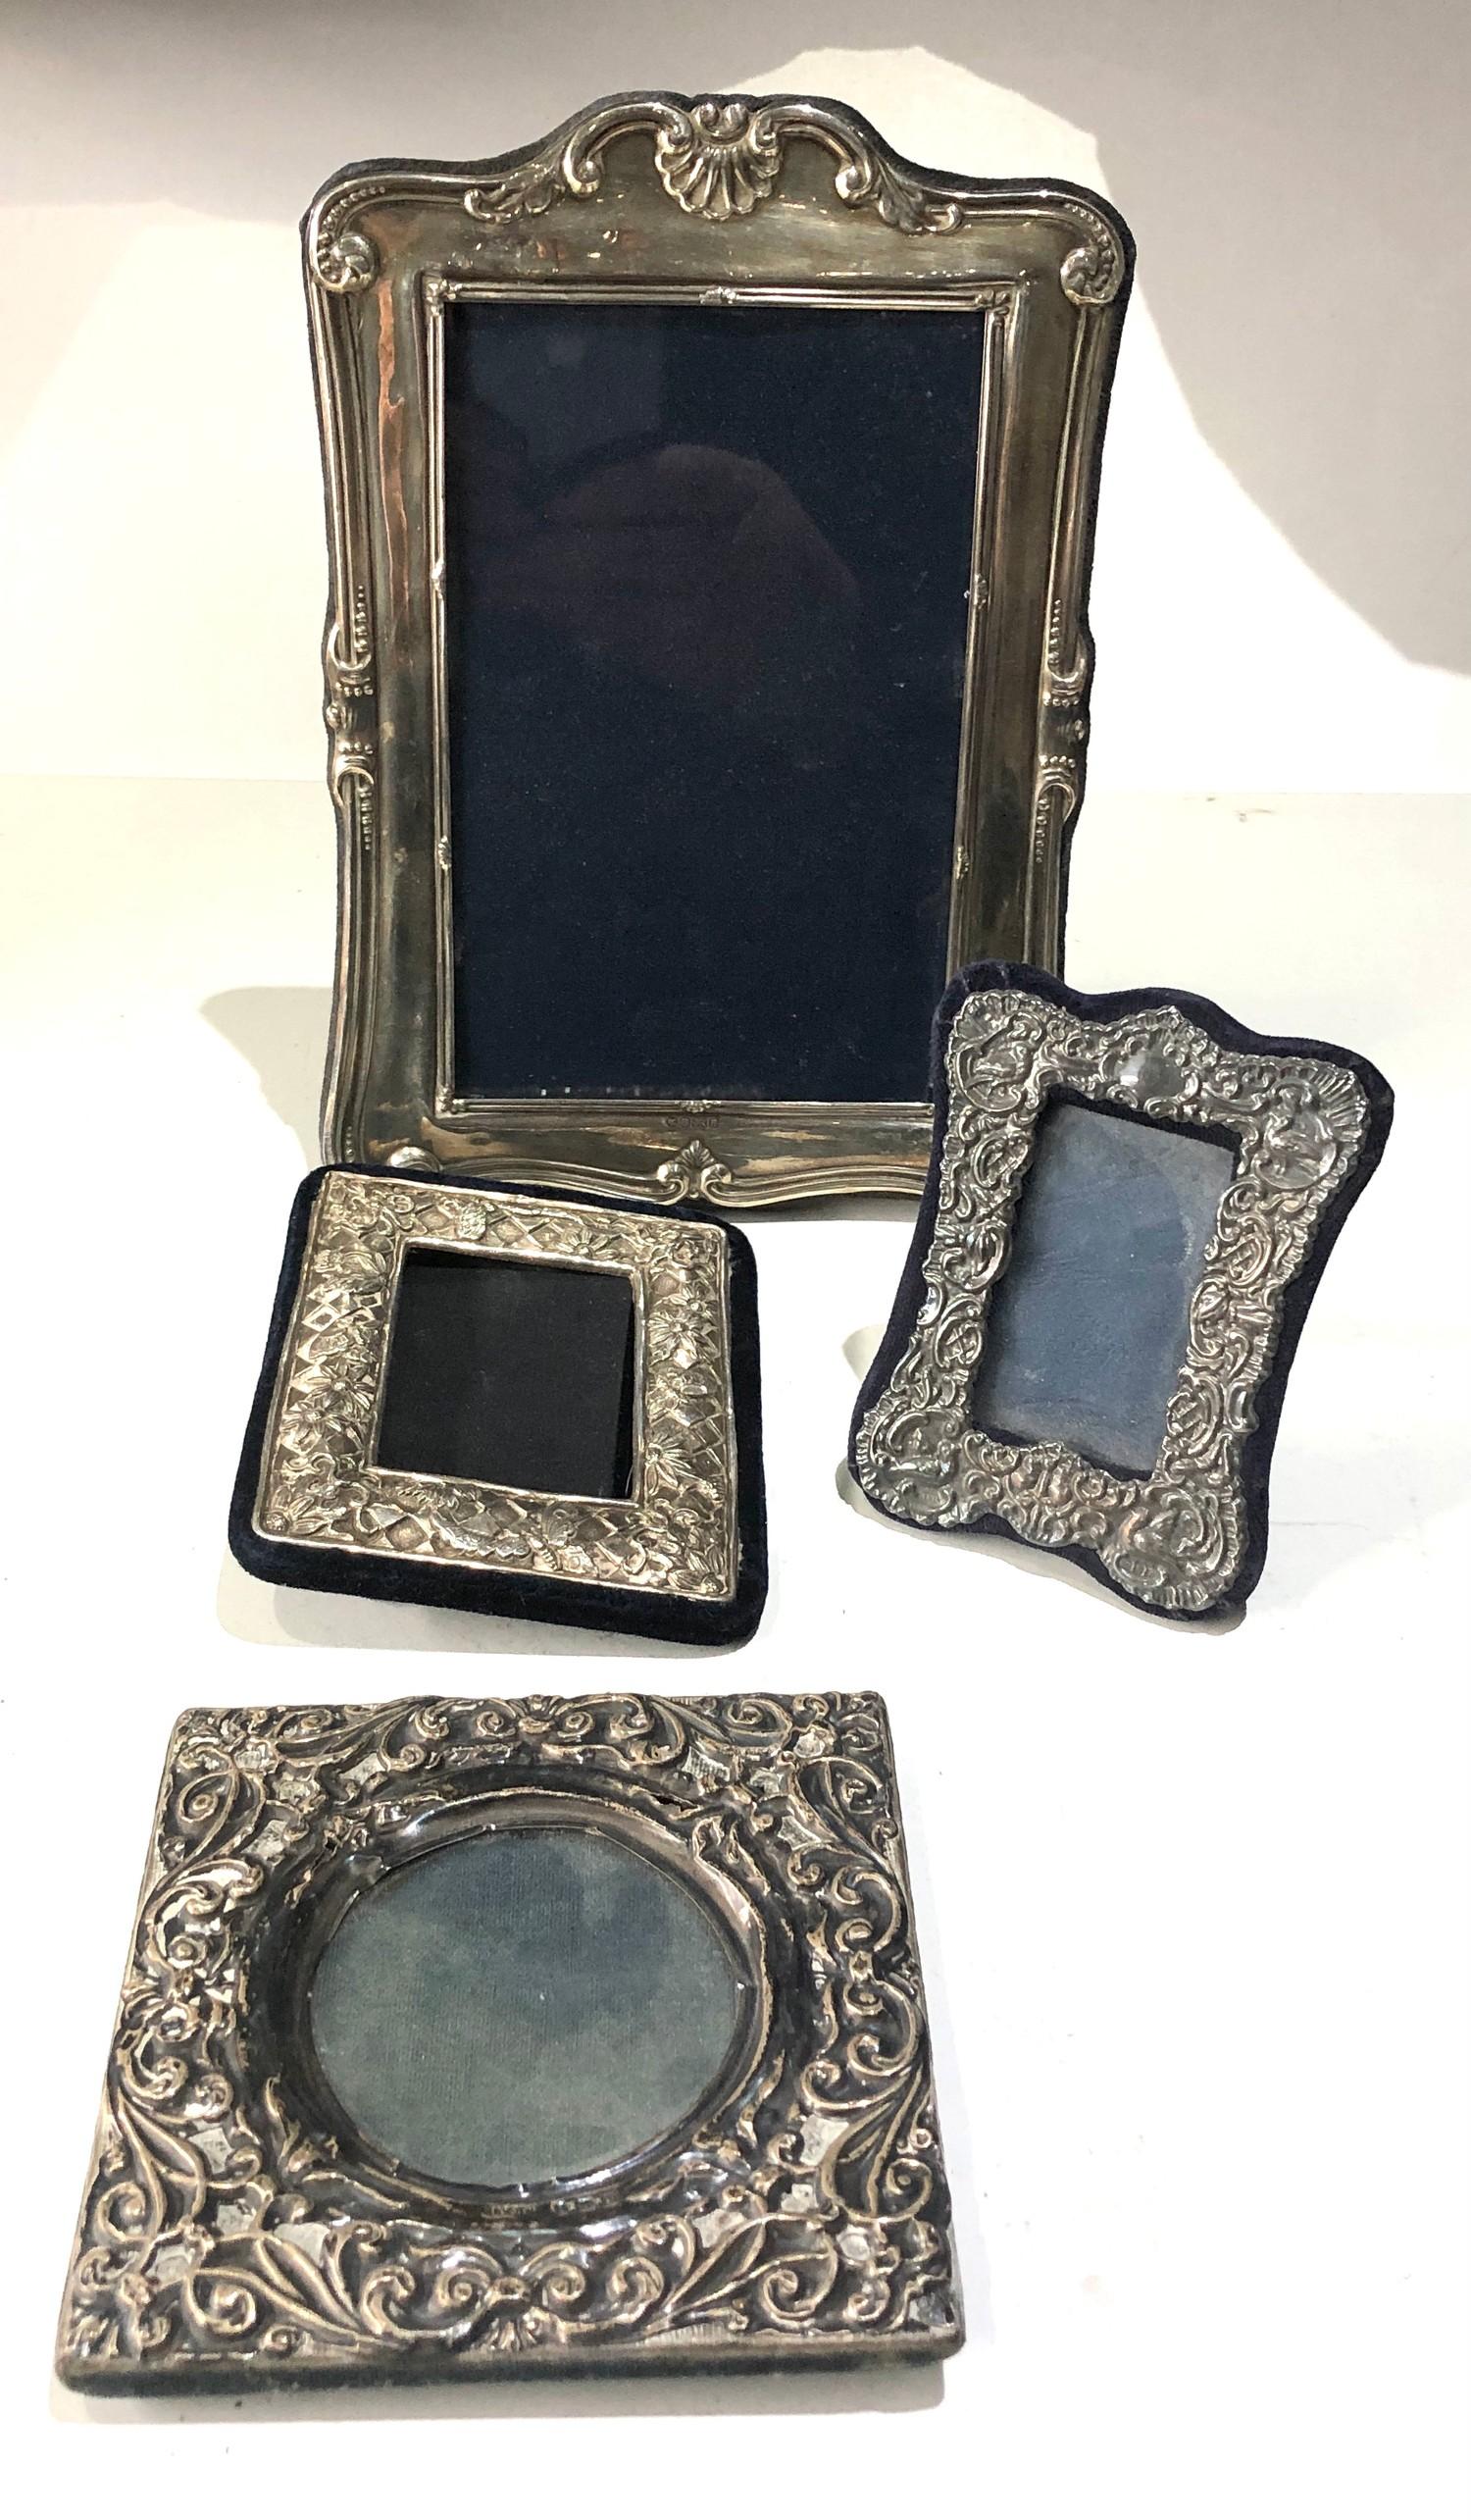 4 silver picture frames largest measures approx 20cm by 15cm - Image 2 of 3